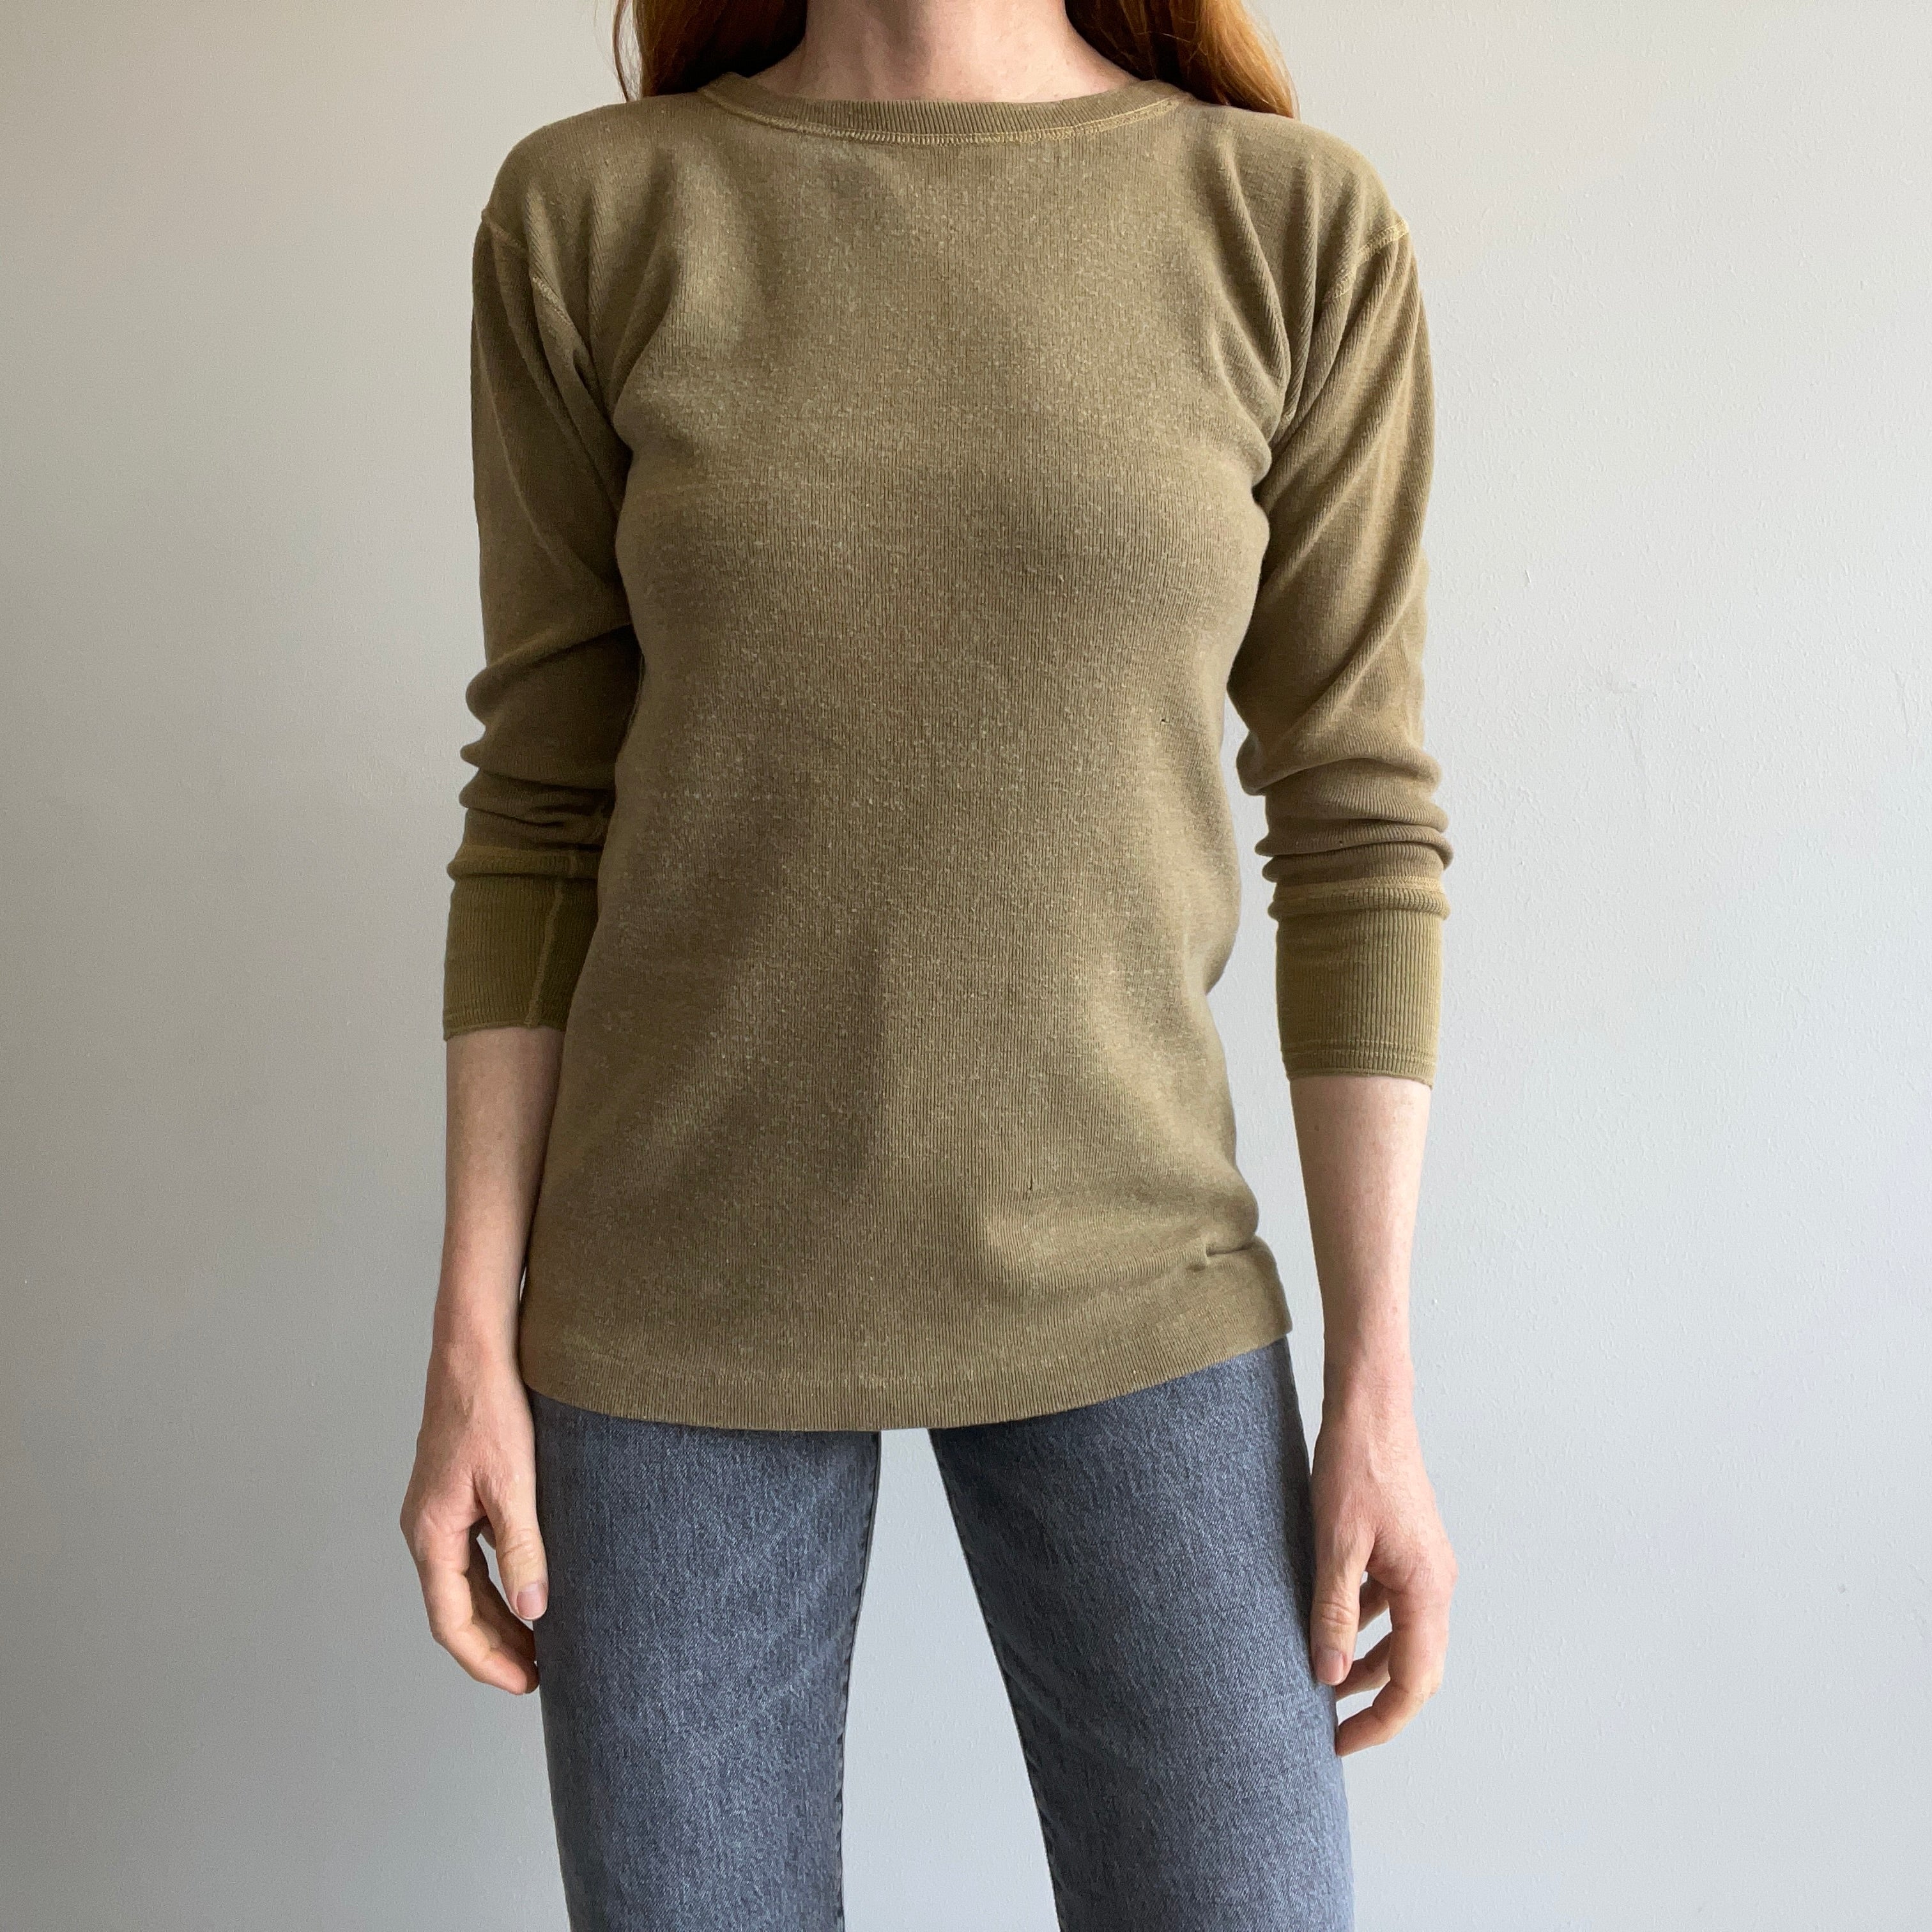 1970s Heavier Knit Army Thermal - 3/4 Sleeves